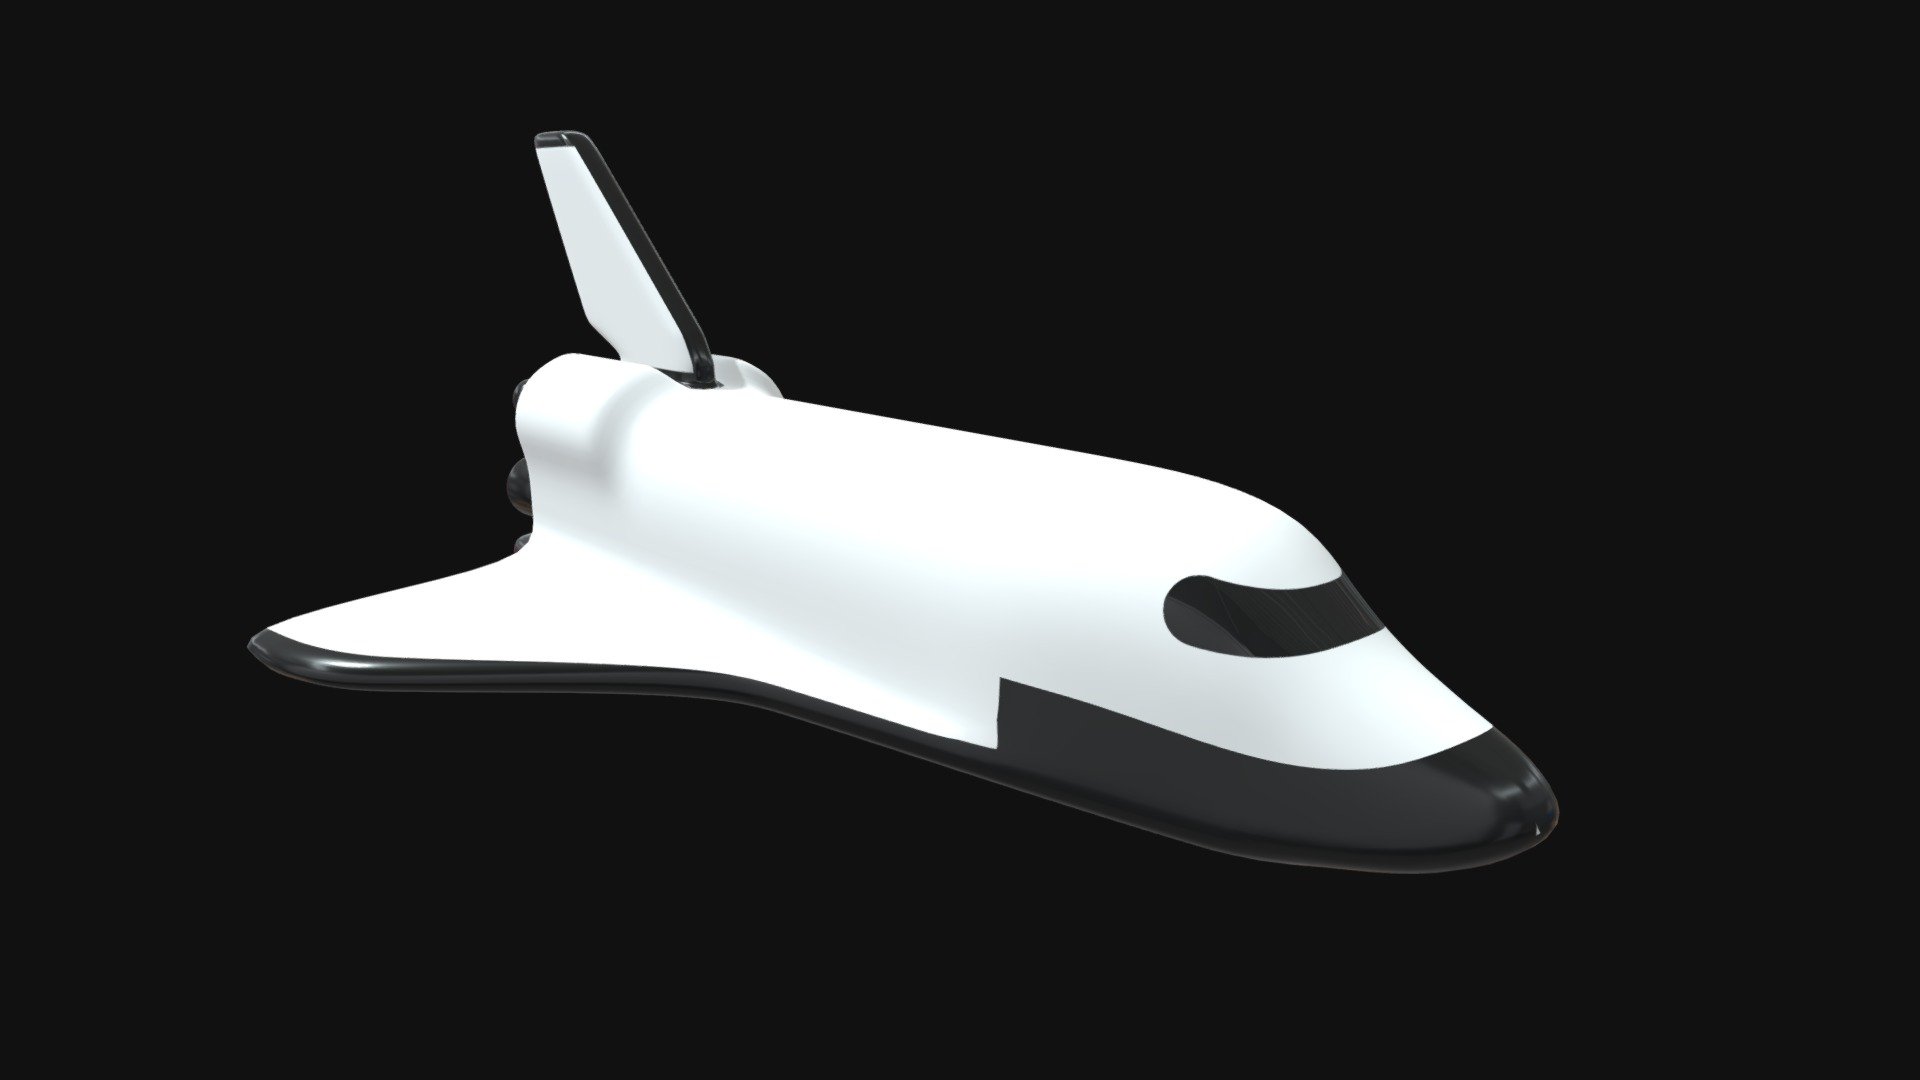 Space Rocket (Shuttle) Low Poly Icon Style.
Correct topology, supports multiple subdivisions.
Archive file contains: .c4d, .fbx, .obj, .mtl, .stl + textures 3d model